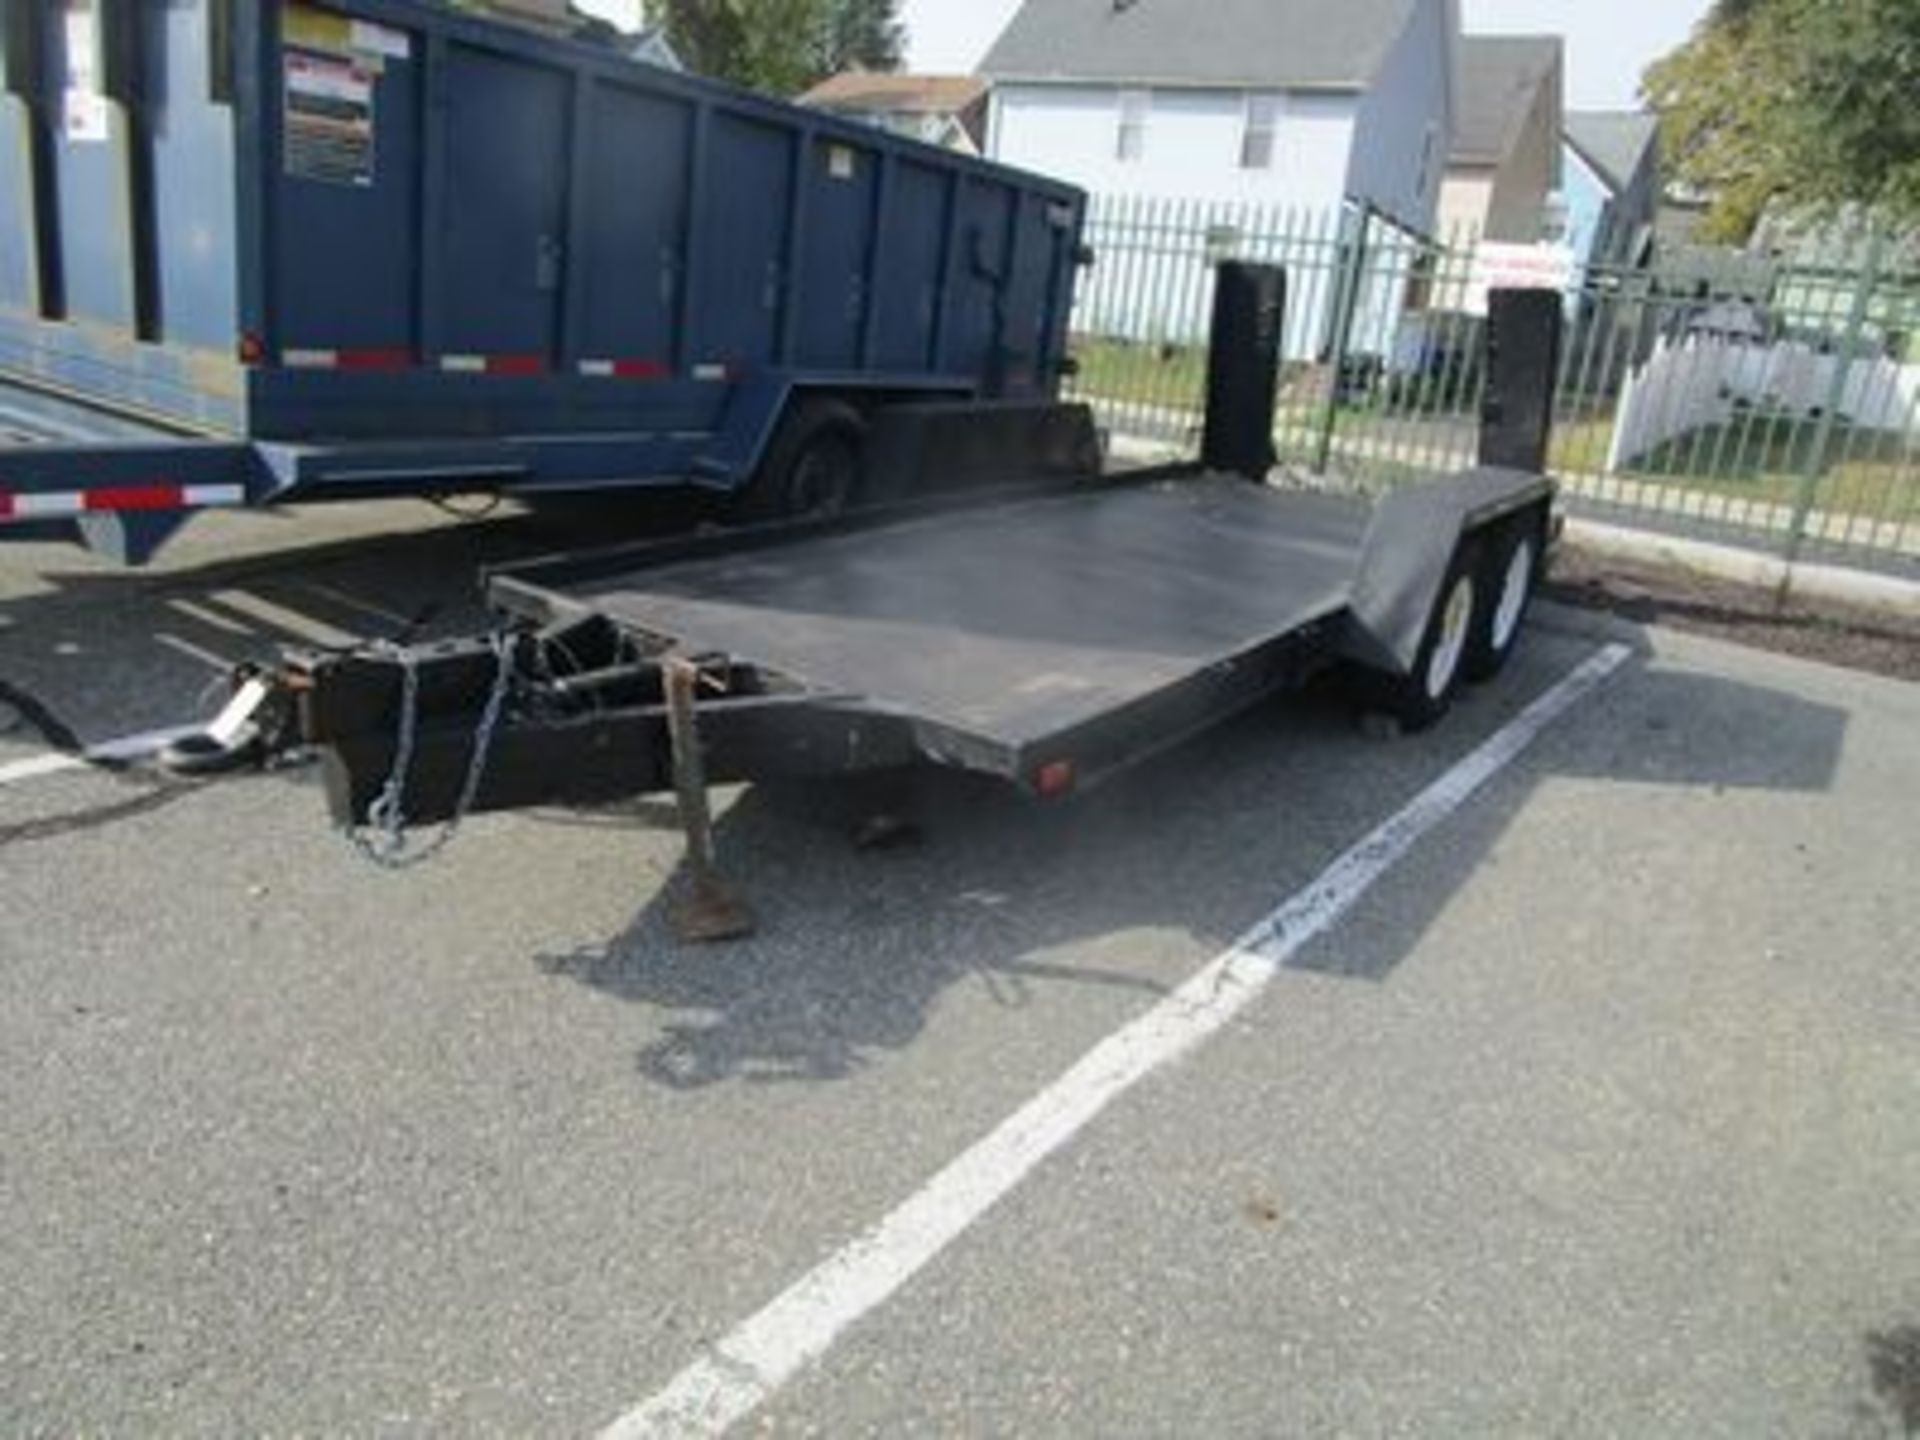 1987 BECK UTILITY TRAILER, T/A, STEEL RAMPS, VIN # 1BH702226HL003692